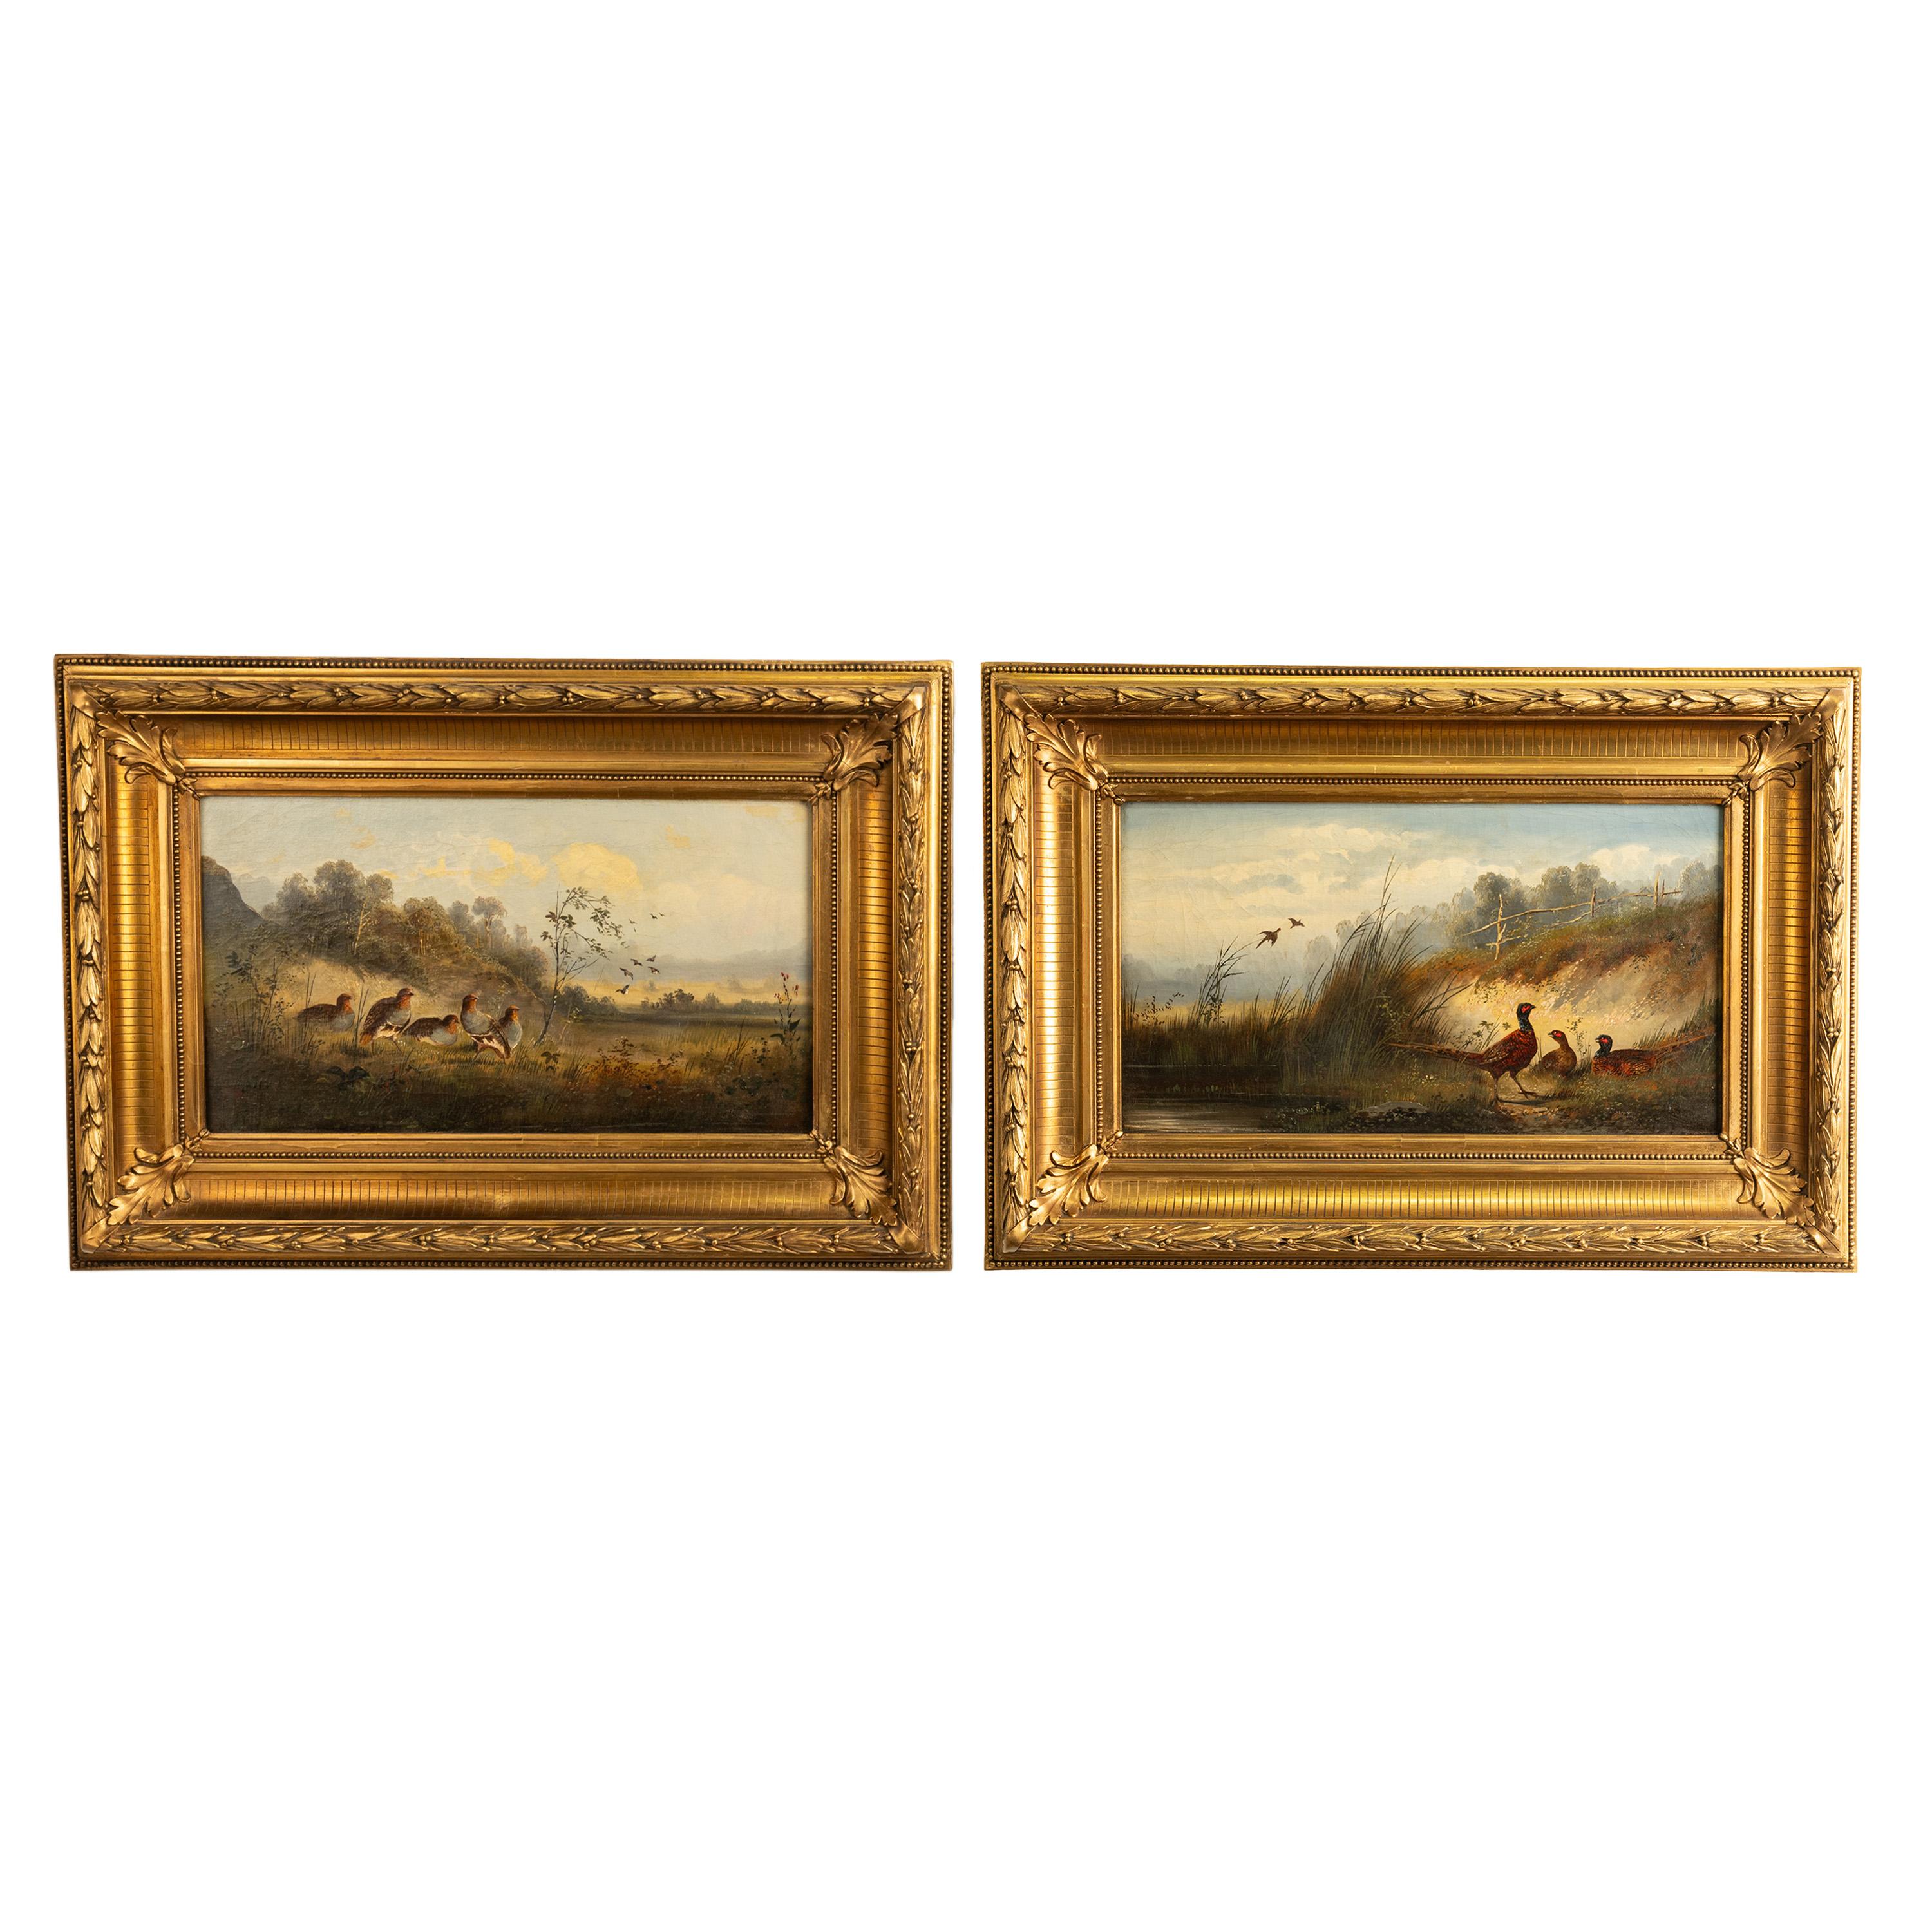 A very good & rare pair of oil on canvas landscape paintings by American 19th century artist Thomas Hill (1829-1908), games birds in a pastoral setting, circa 1875.
The painting to the left depicts five sage grouse hens in a meadow, signed lower